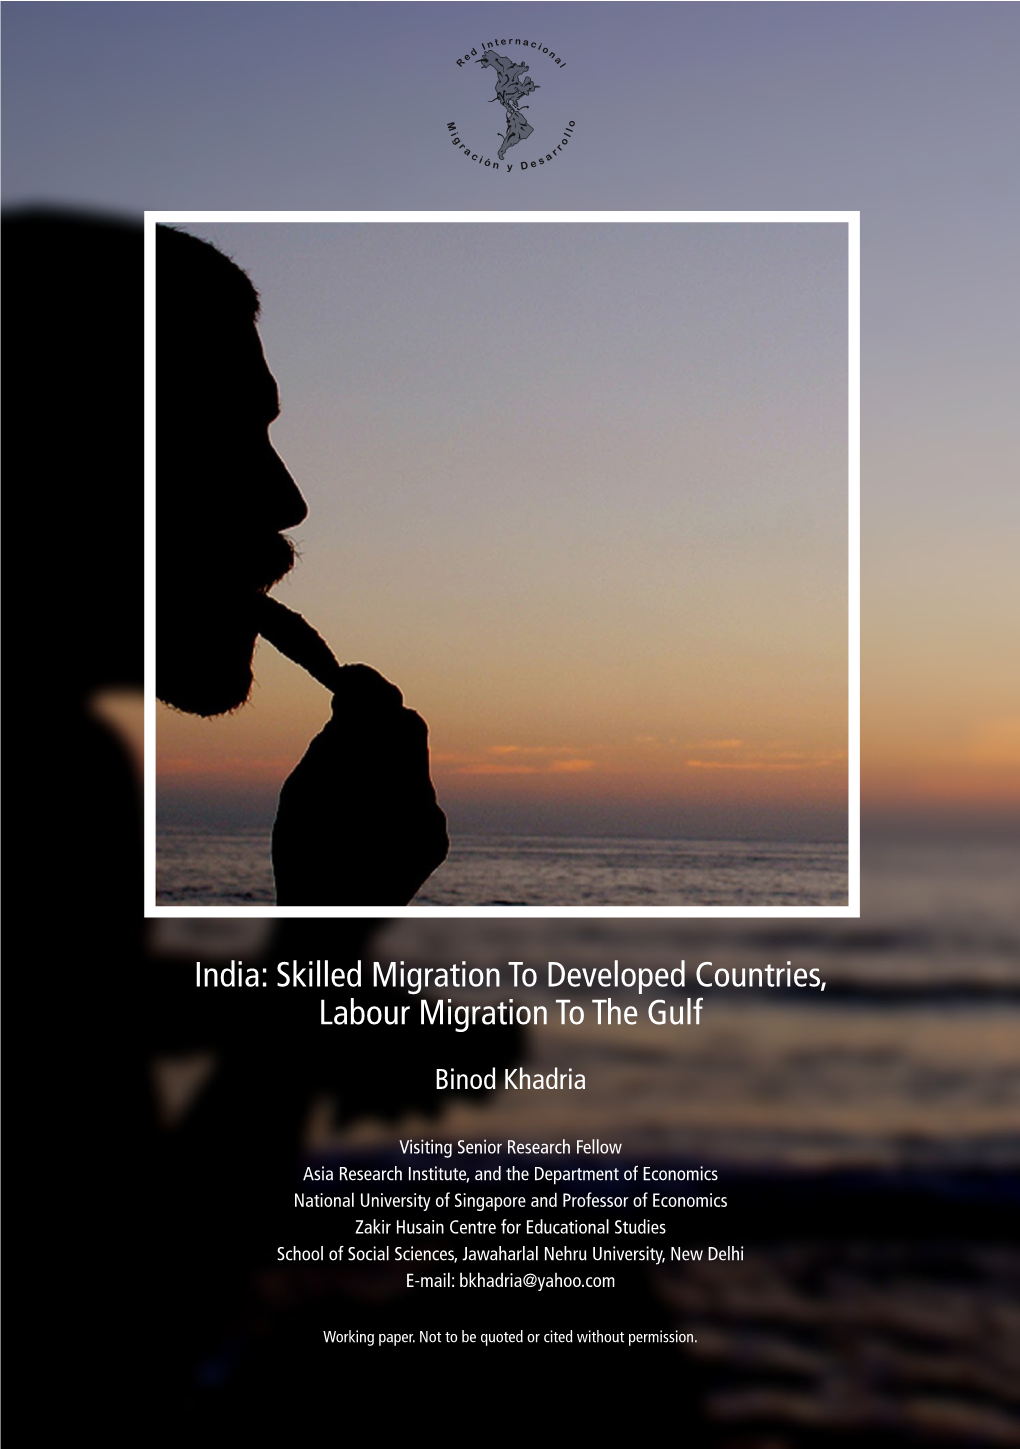 India: Skilled Migration to Developed Countries, Labour Migration to the Gulf